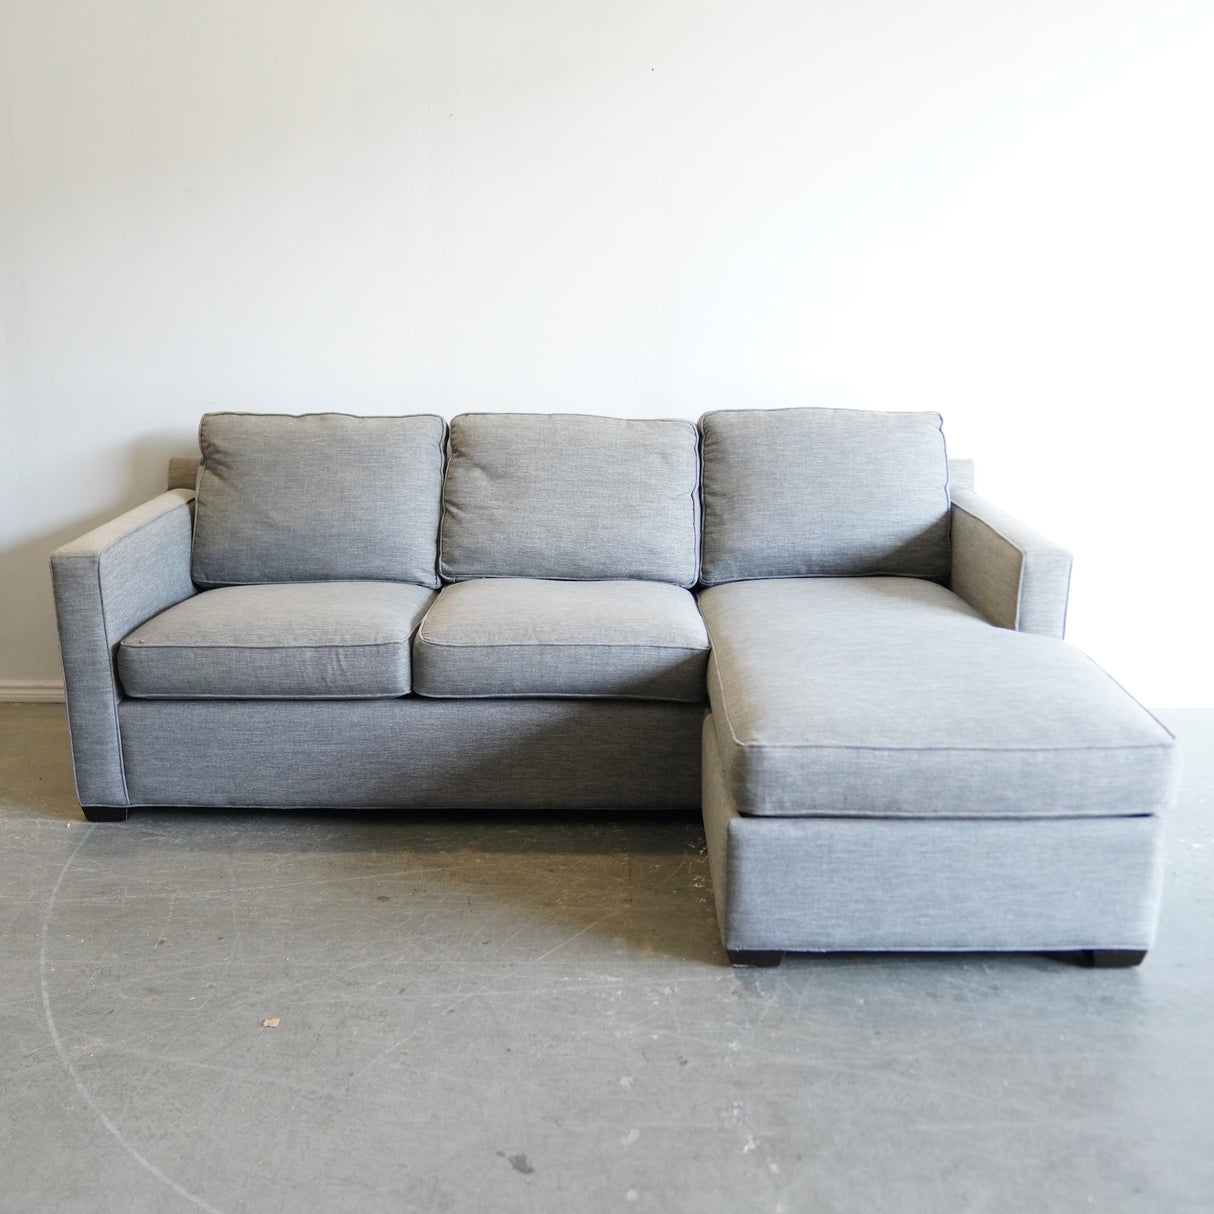 Crate and Barrel Reversible sectional sofa with storage